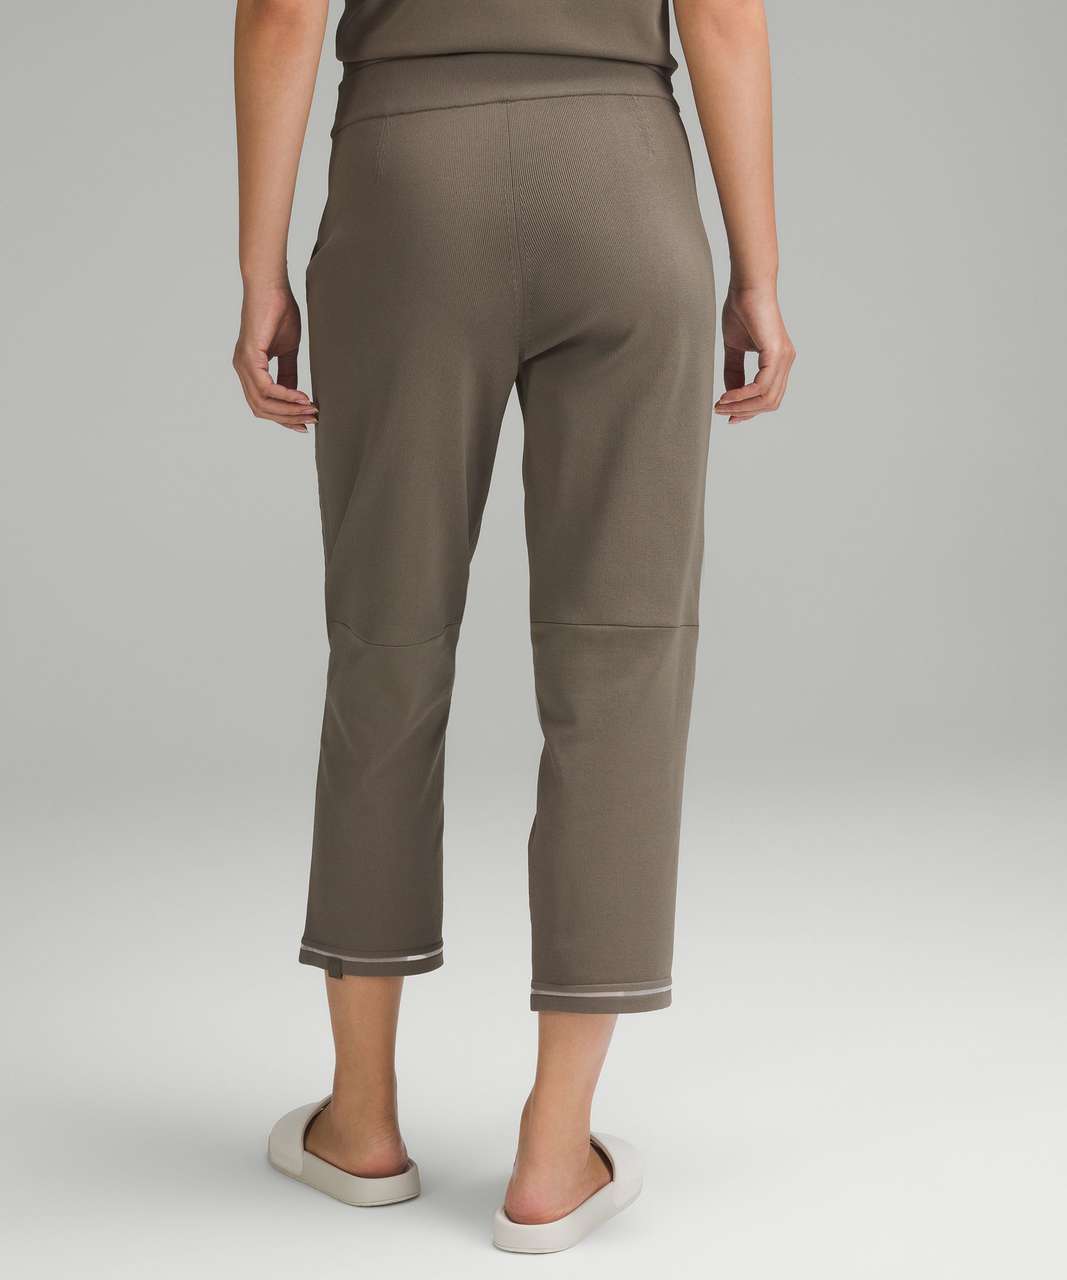 Lululemon Relaxed-Fit High-Rise Knit Cropped Pants 24" - Nomad